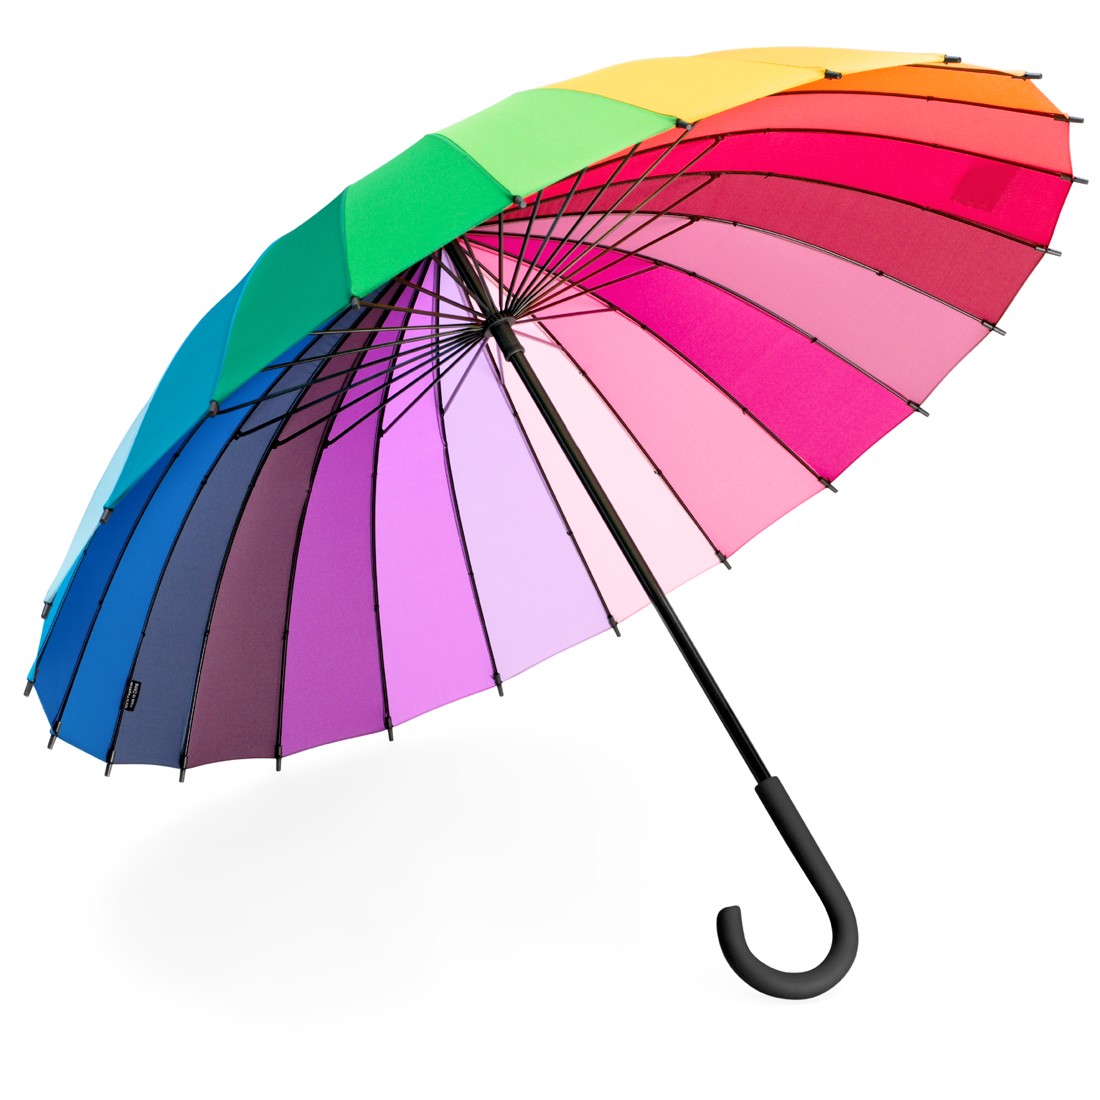 Umbrella Pictures To Color Clipart Best